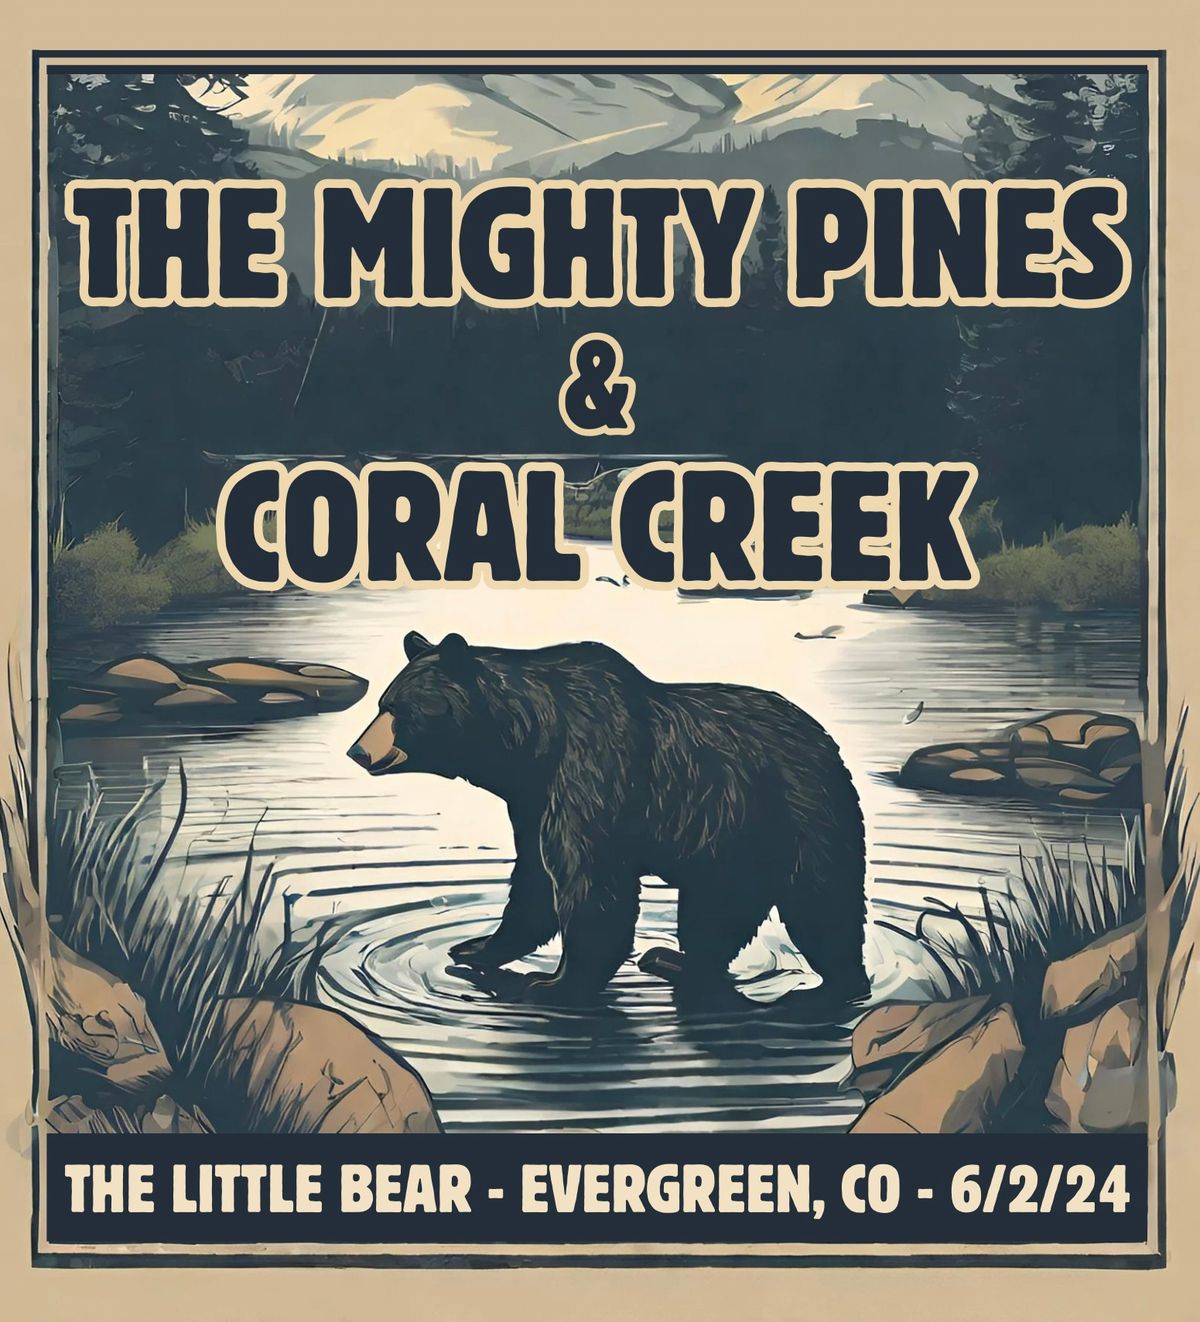 The Mighty Pines & CORAL CREEK at The Little Bear